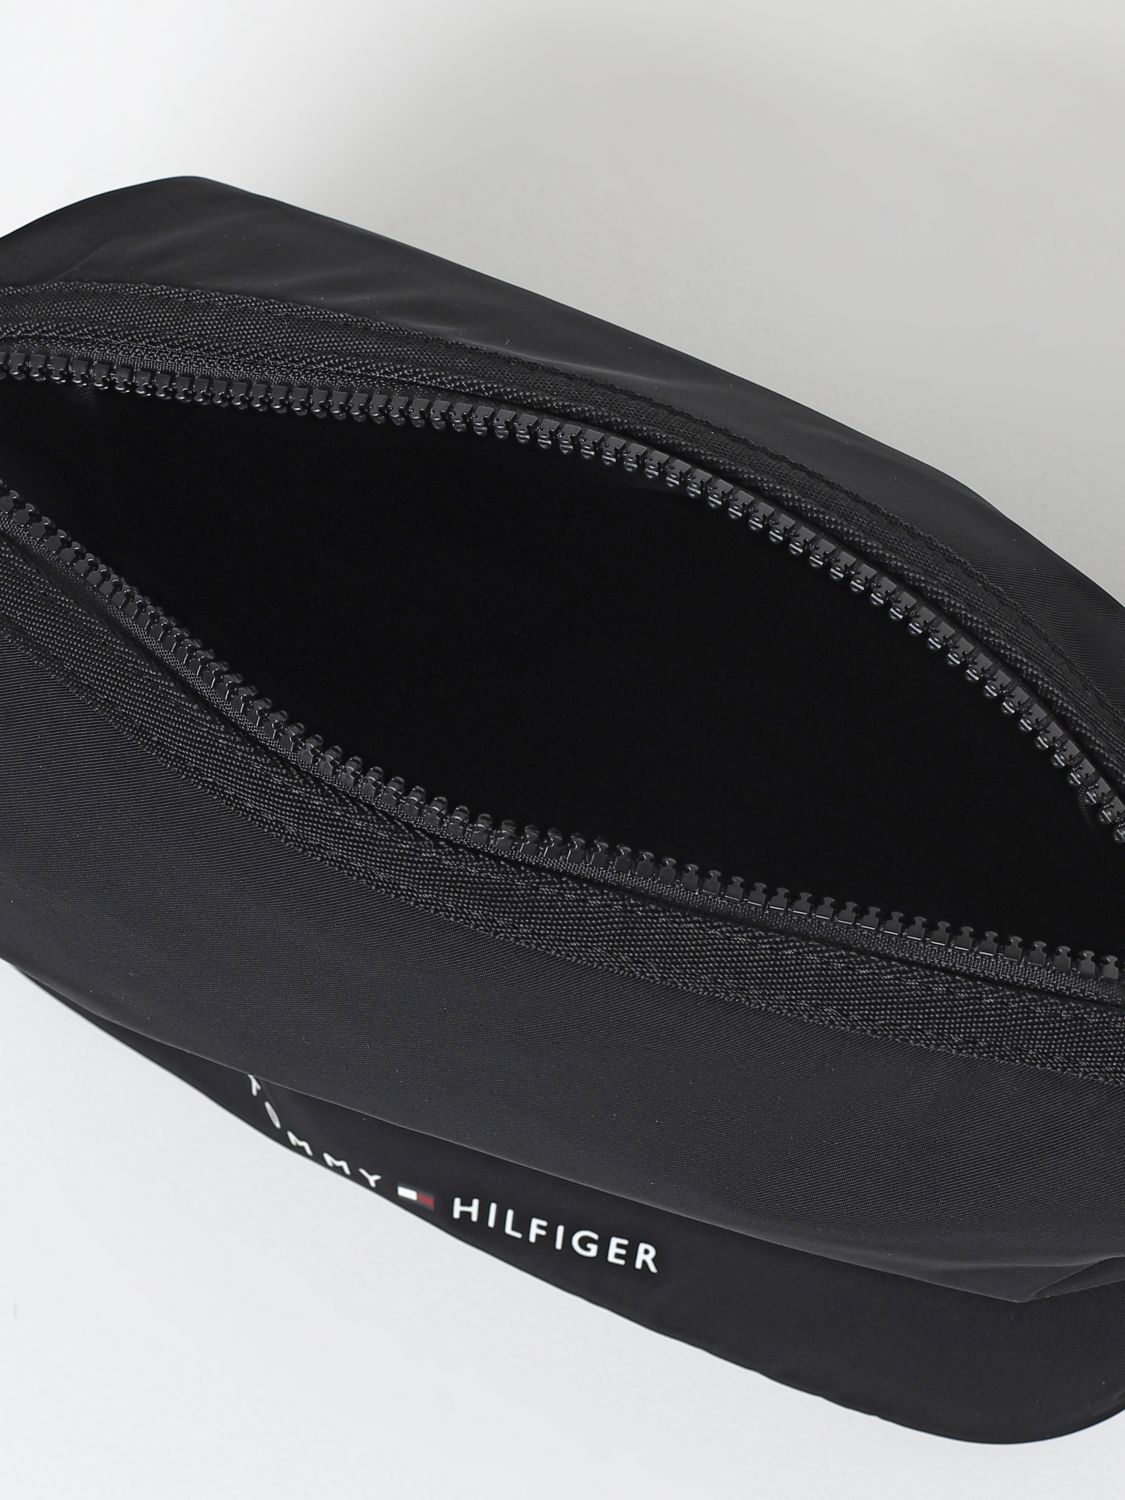 TOMMY HILFIGER - Men's beauty-case with signature loop 